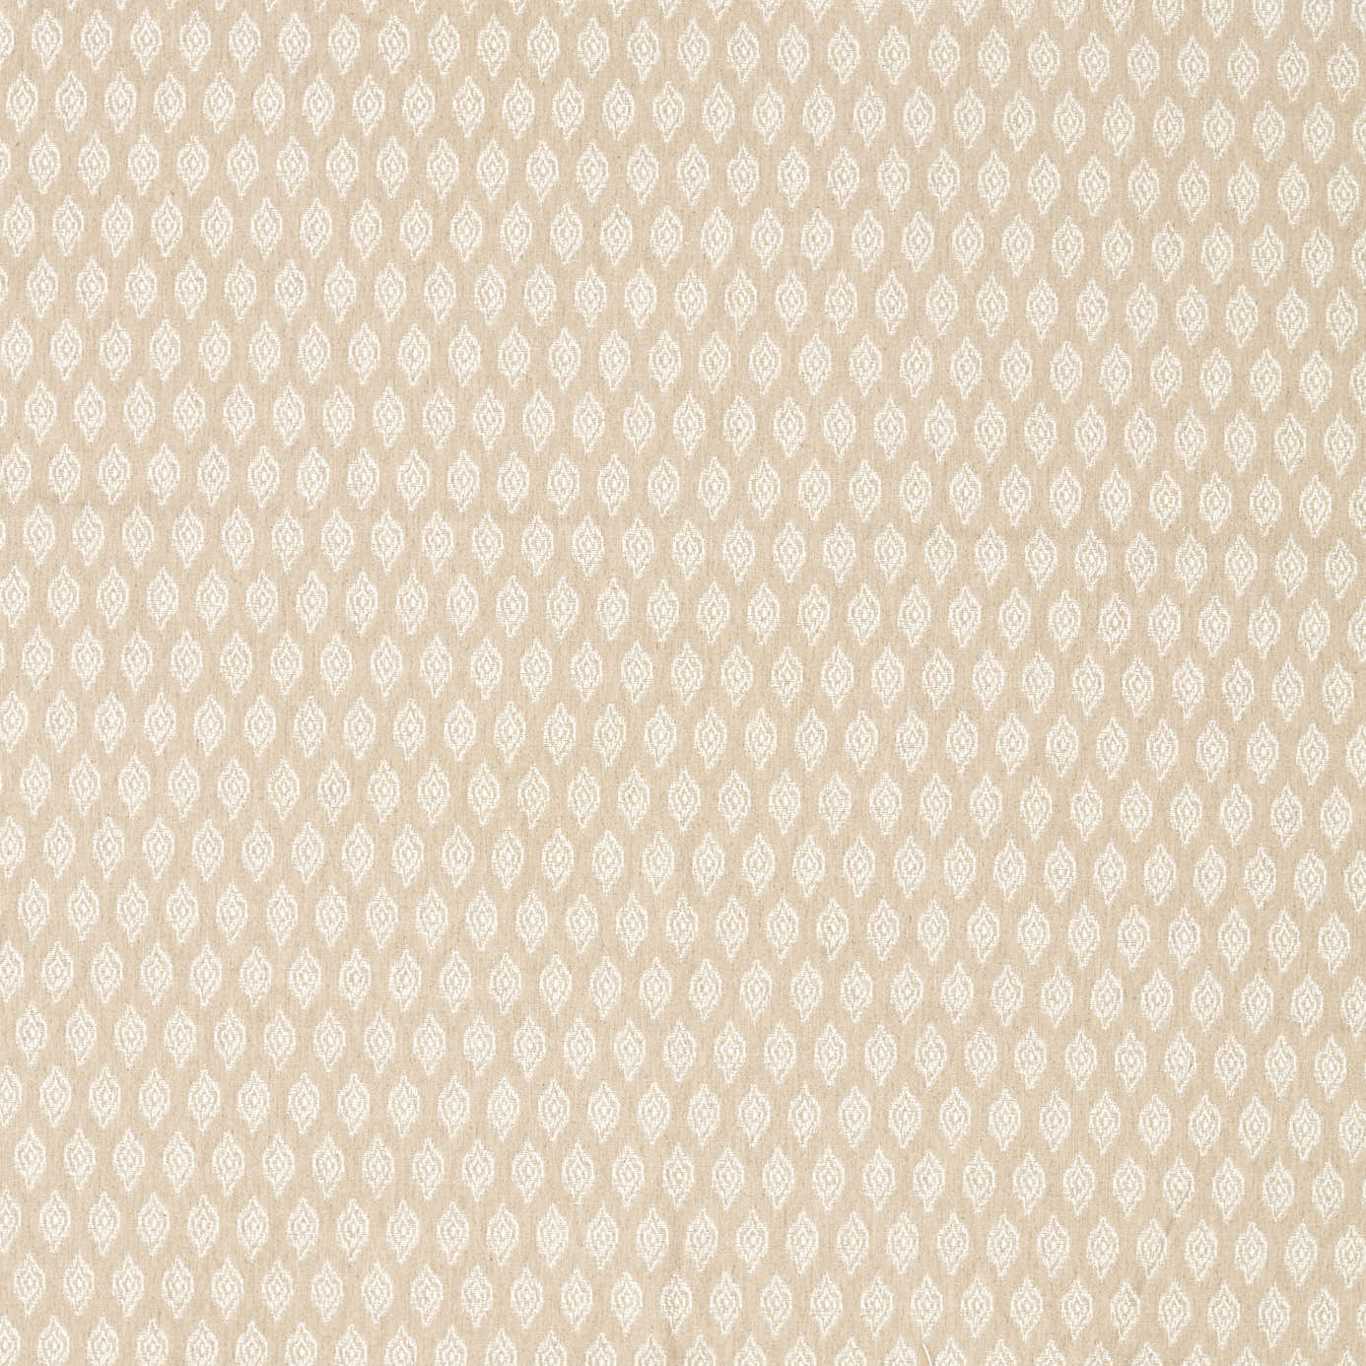 Pure Hawkdale Weave Flax Fabric by MOR